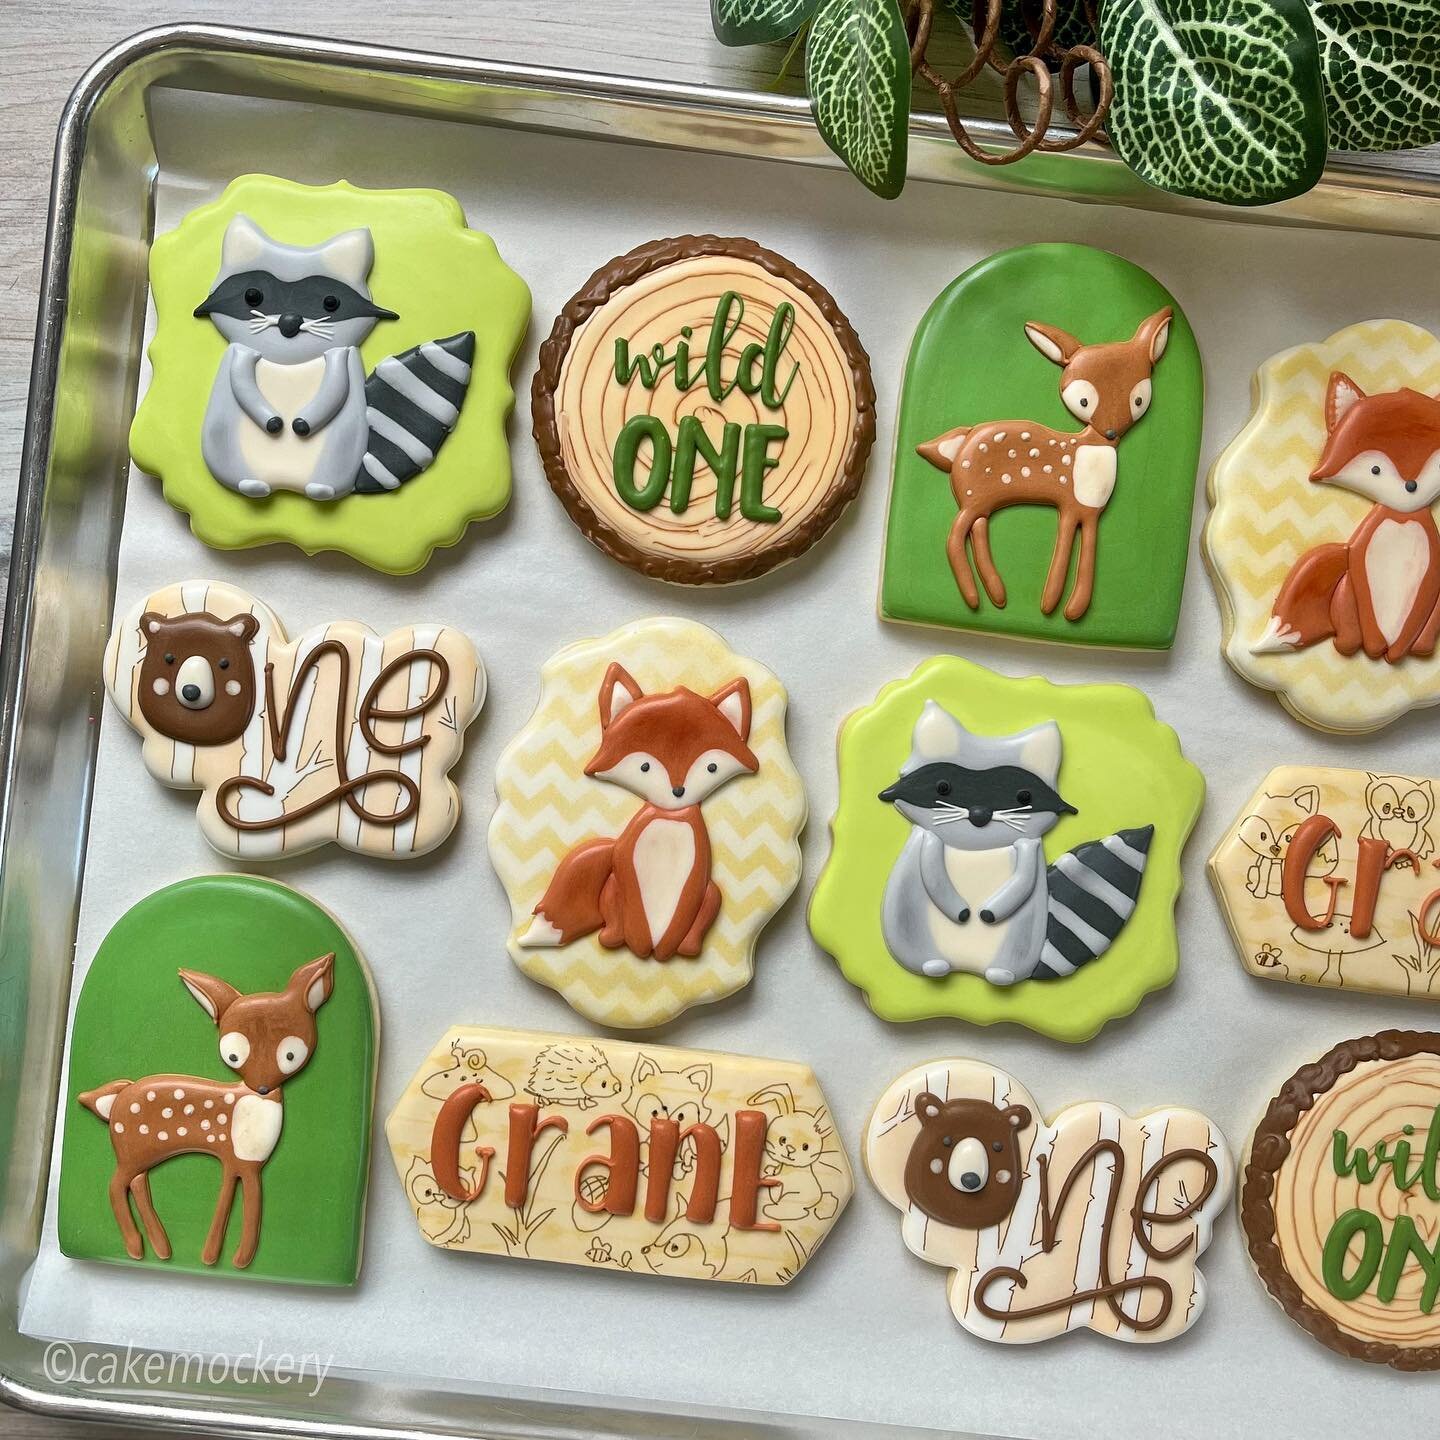 Grant is a wild ONE!!!! A woodland themed cookie set fit for a wildly cool kid!